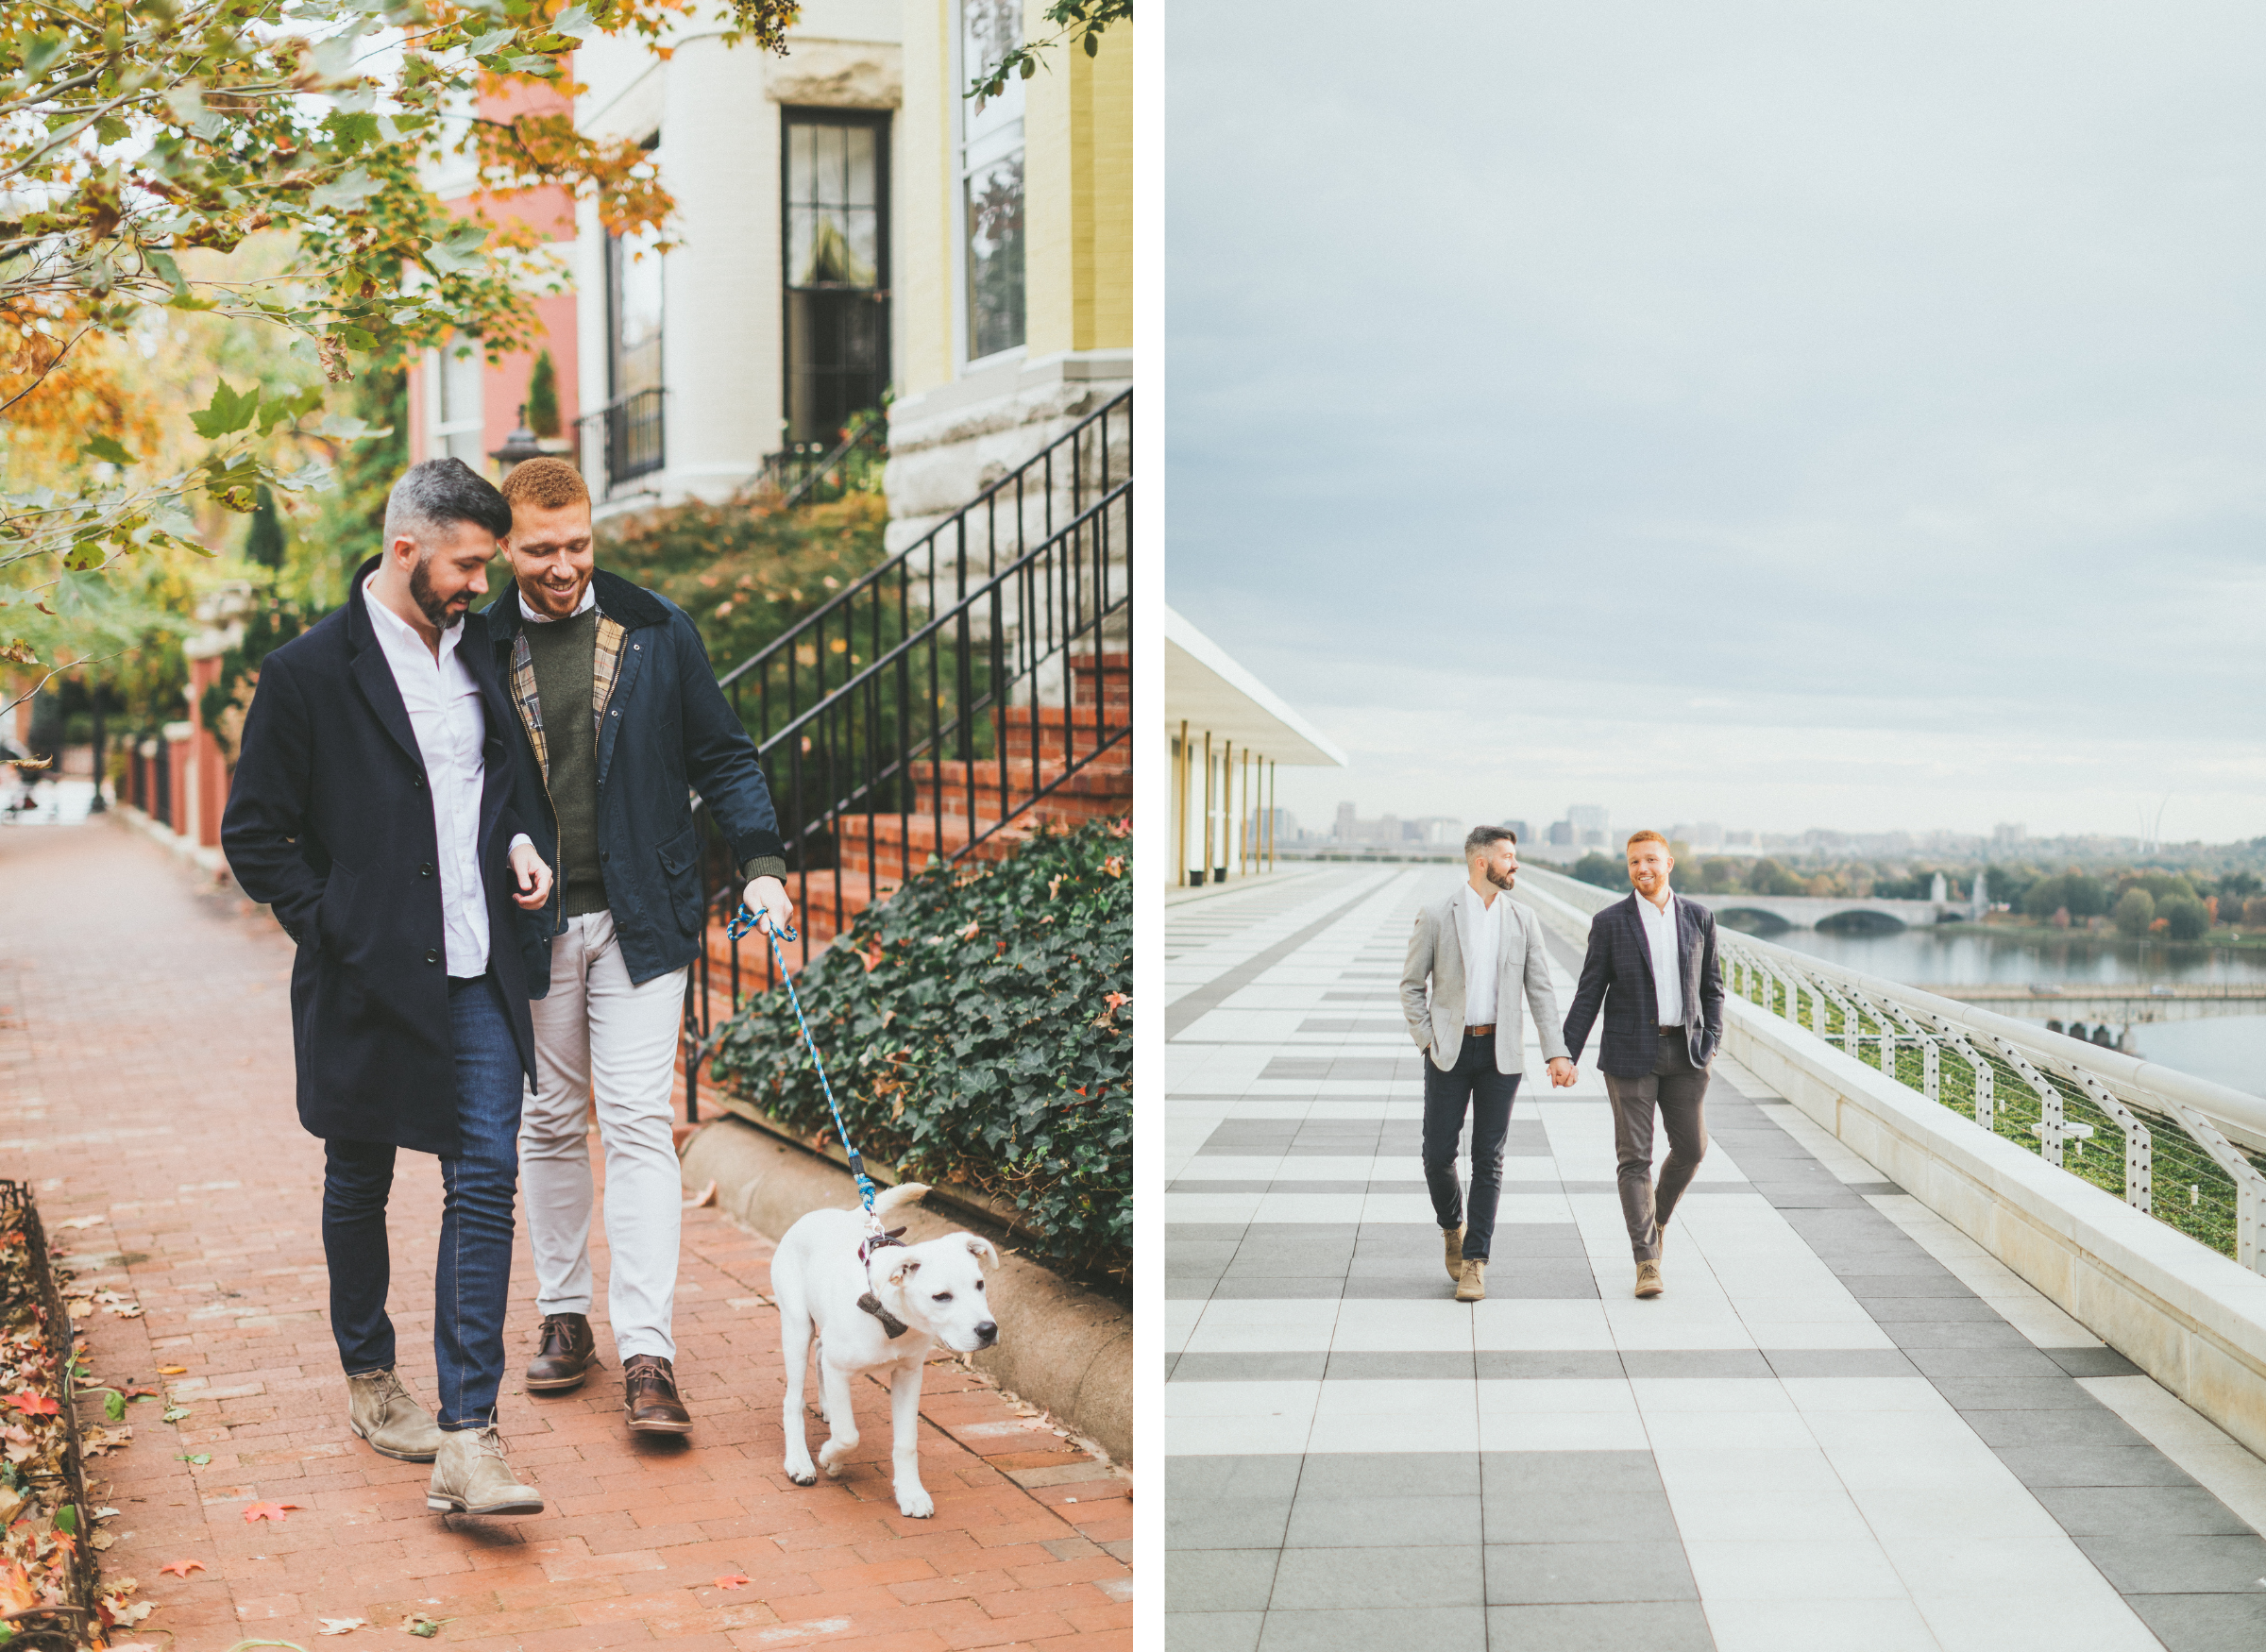 Engagement Photo Ideas in Georgetown, DC